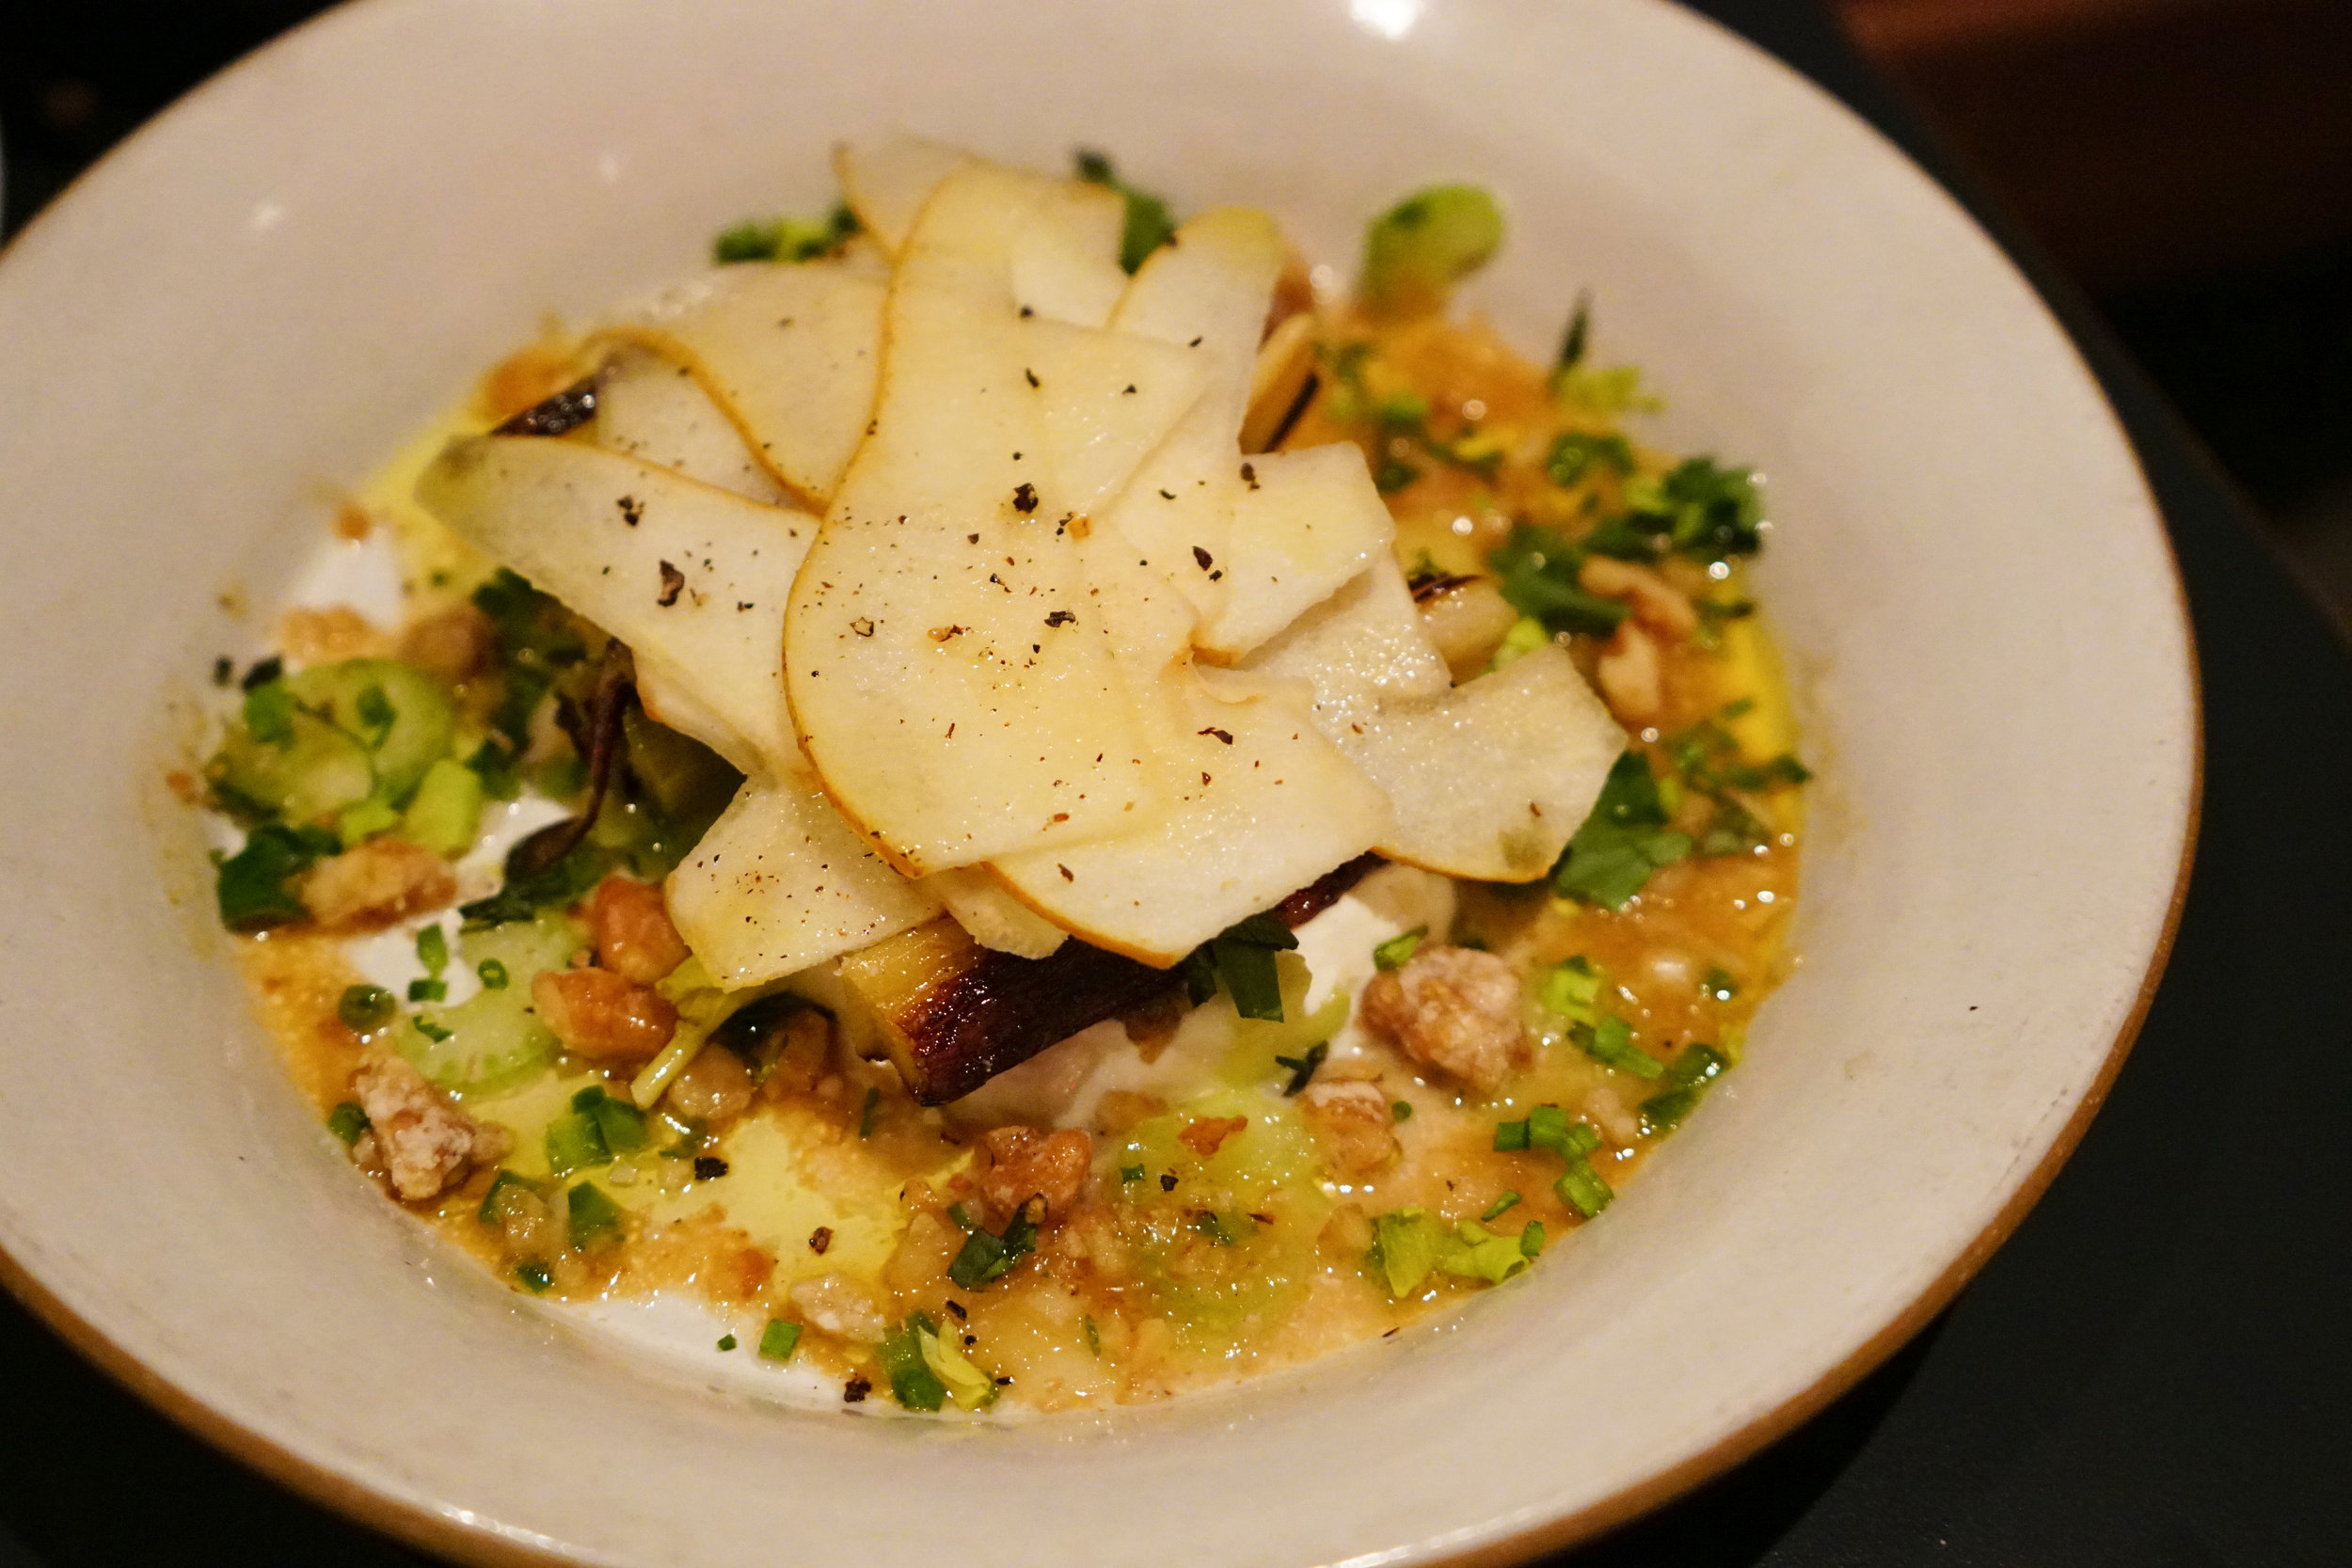 Leeks and Pears at Loring Place in New York City